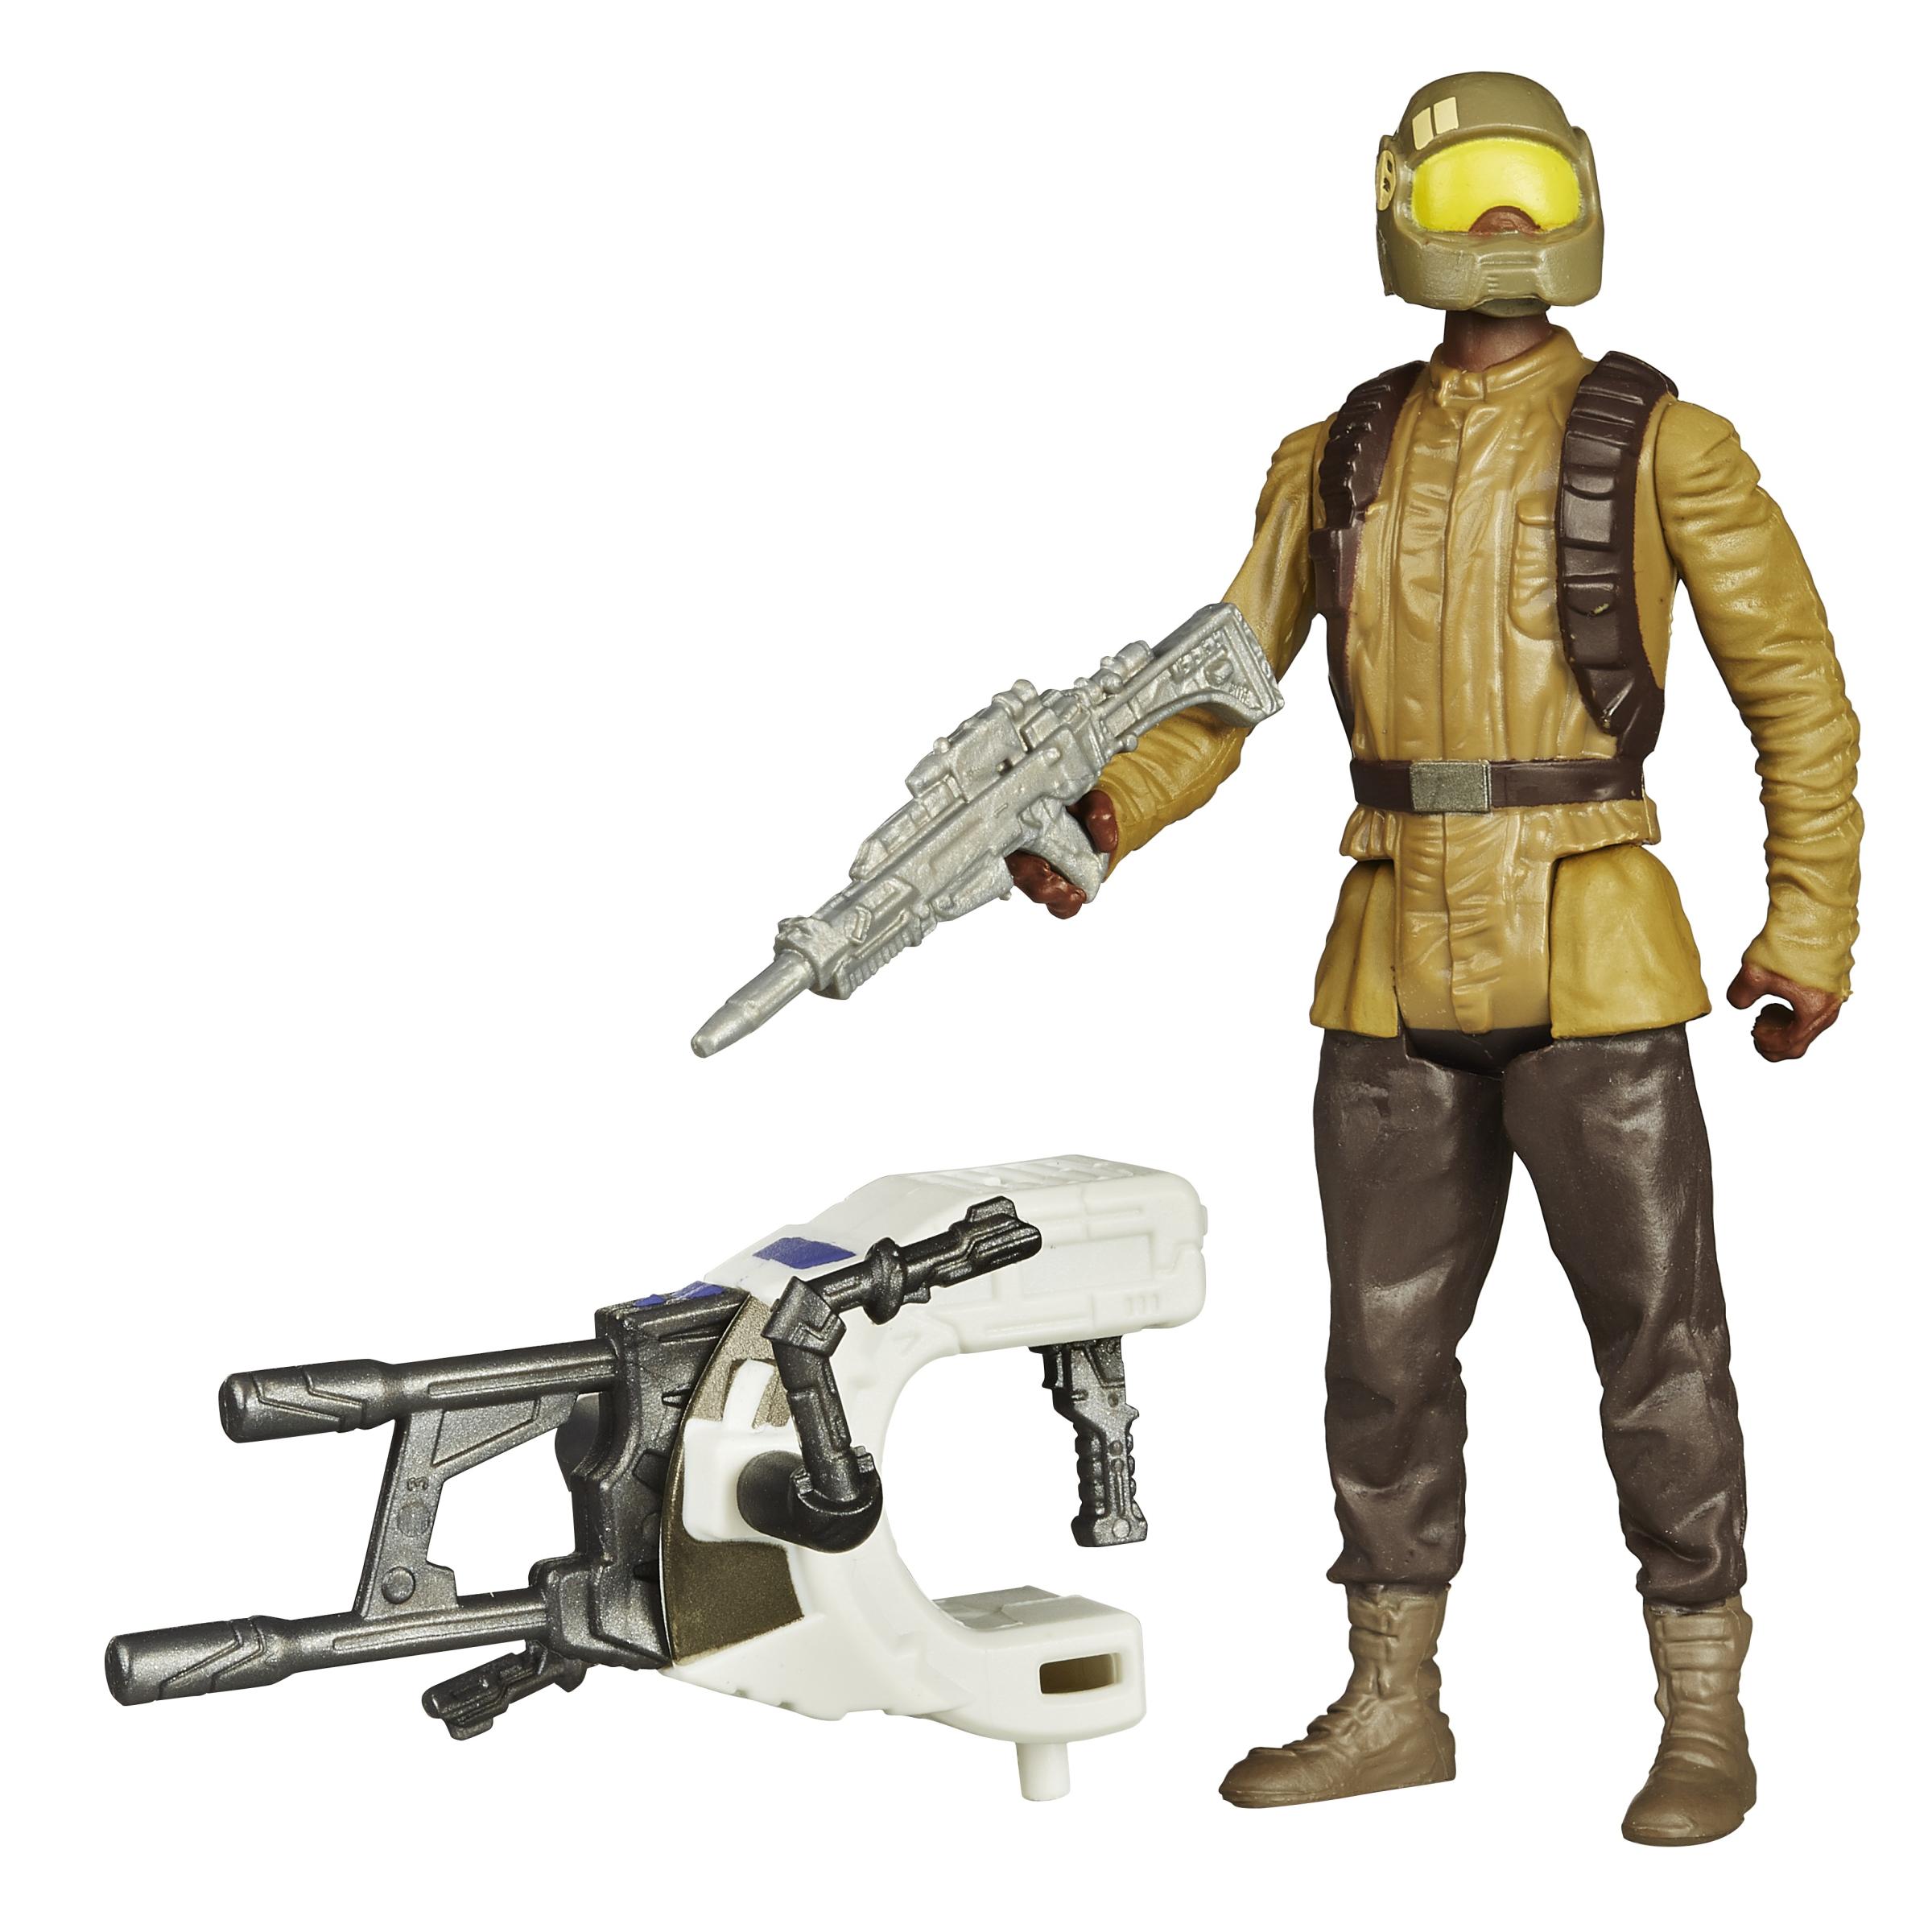 Star Wars The Force Awakens Build a Weapon - Rebellion Pilot